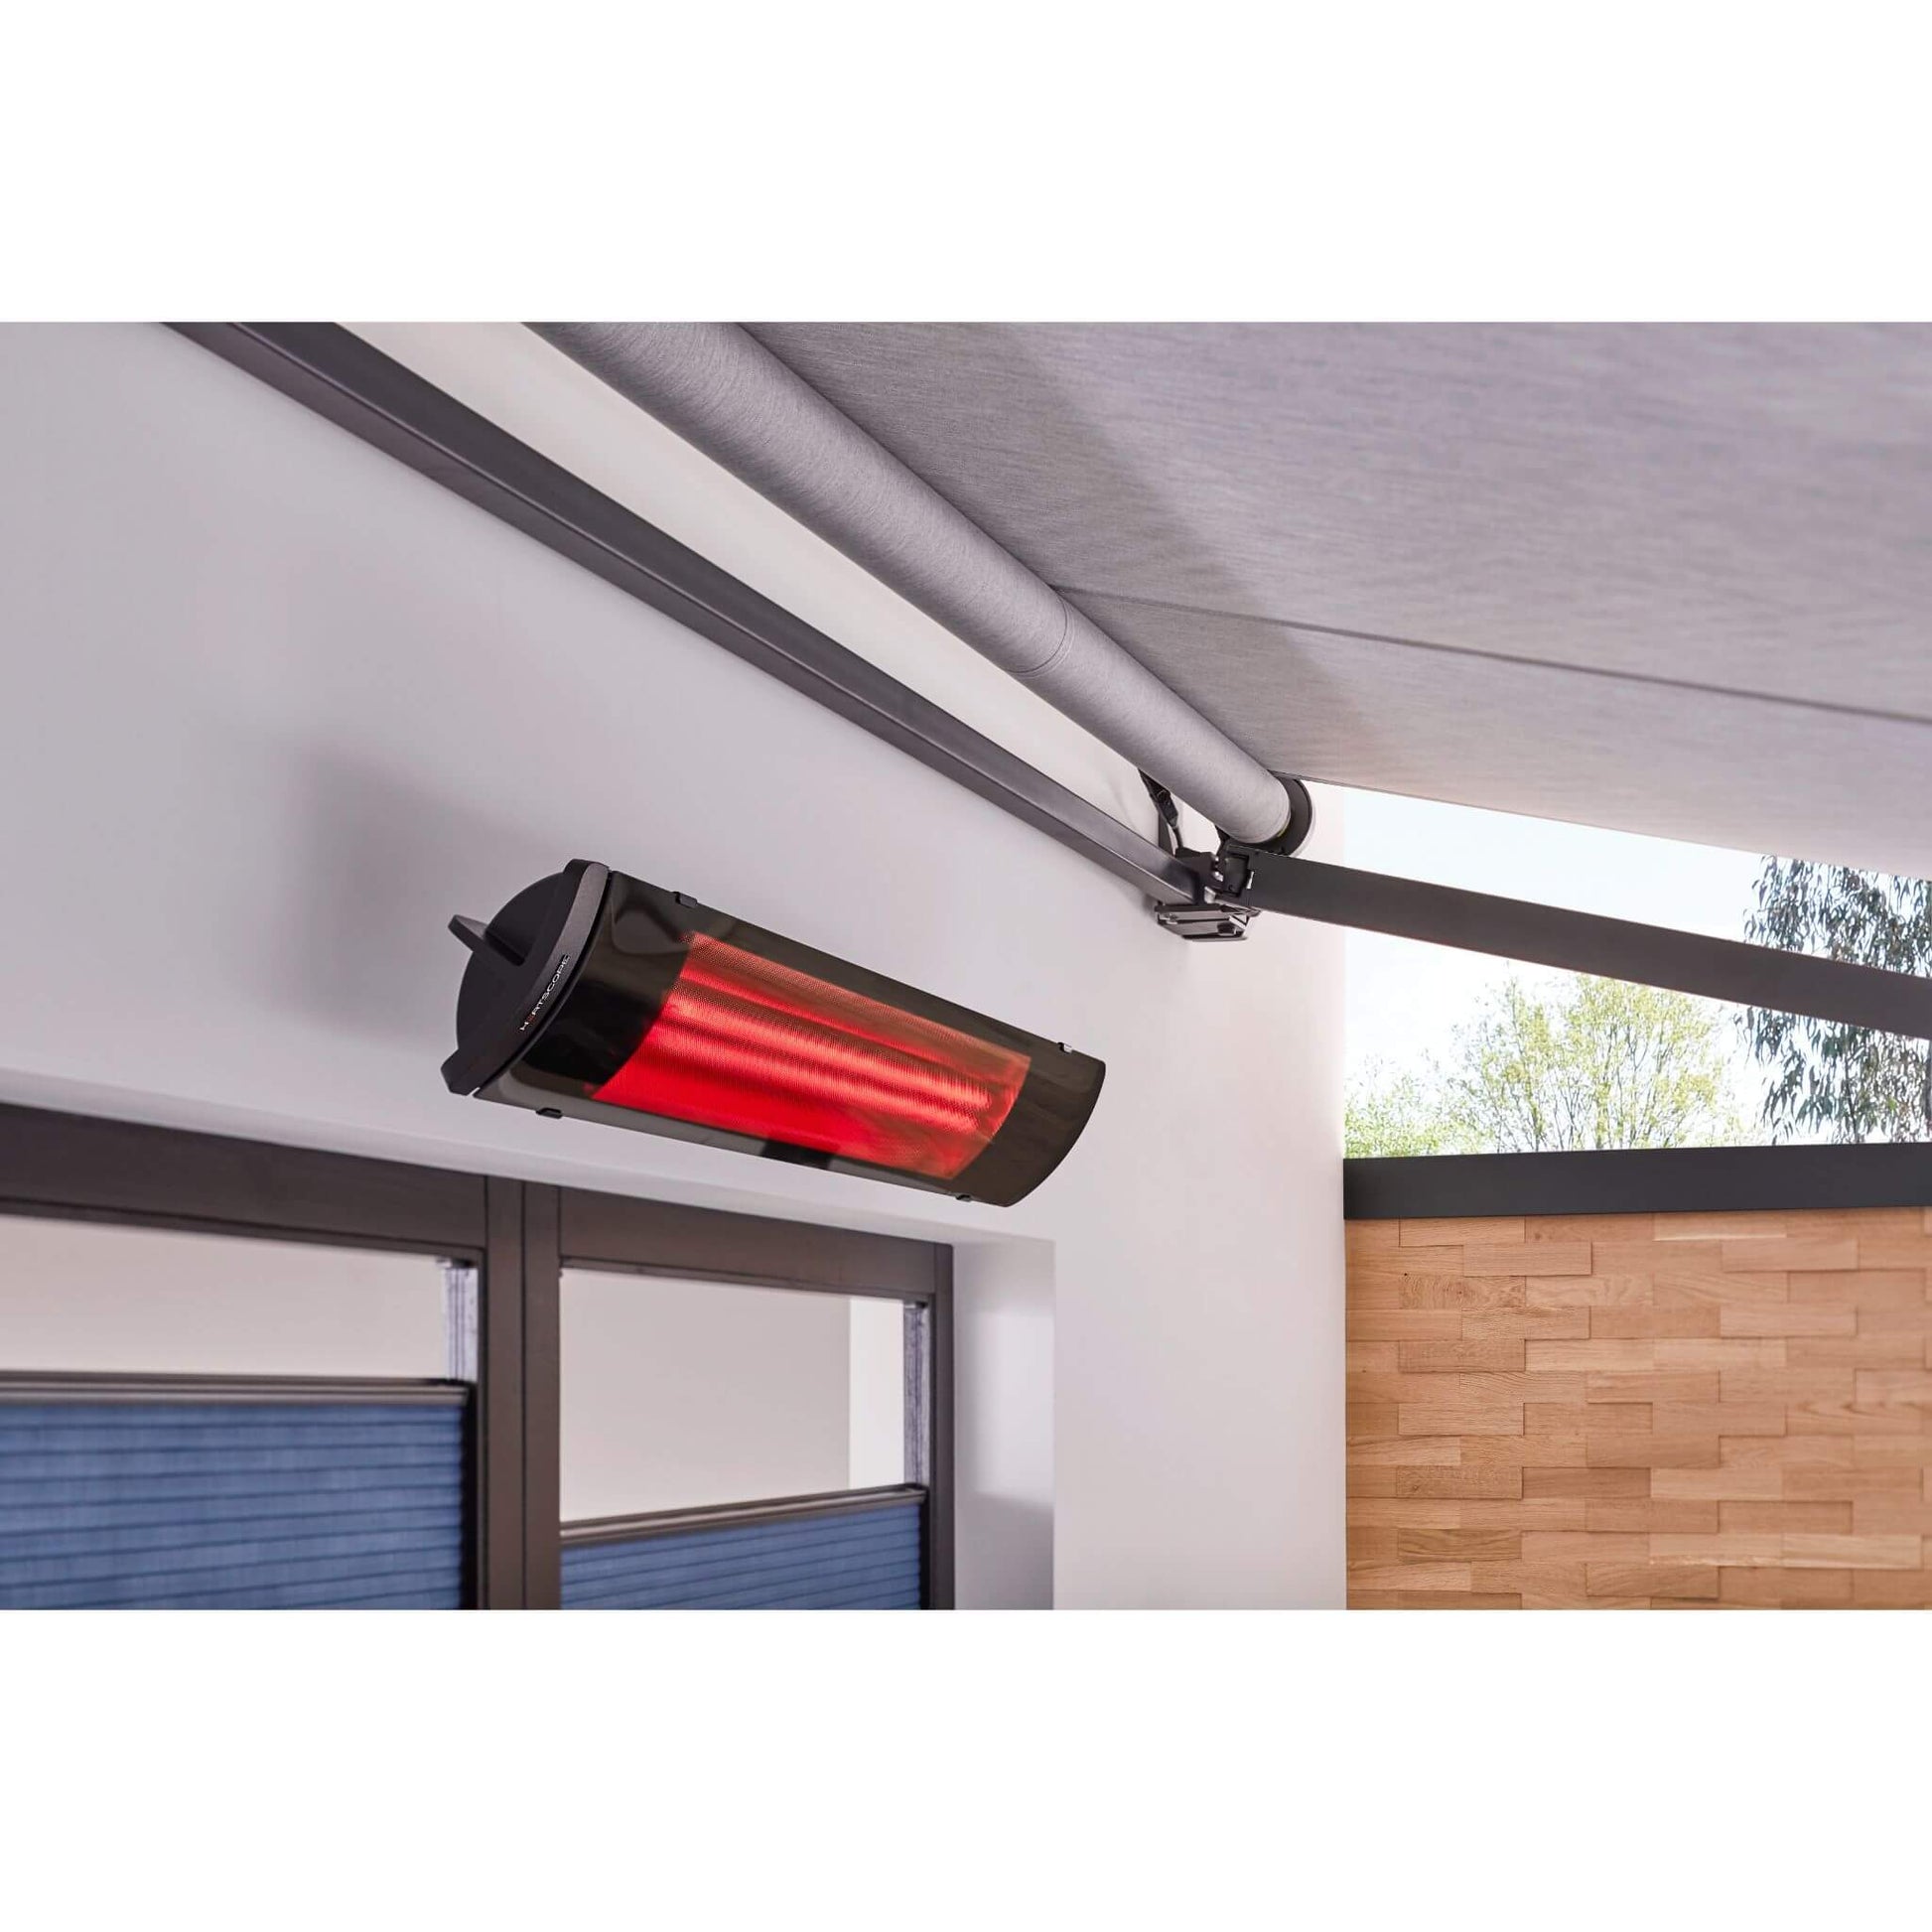 Heatscope PURE radiant 24kW / 30kW infrared wall-mounted electric heater on patio in black